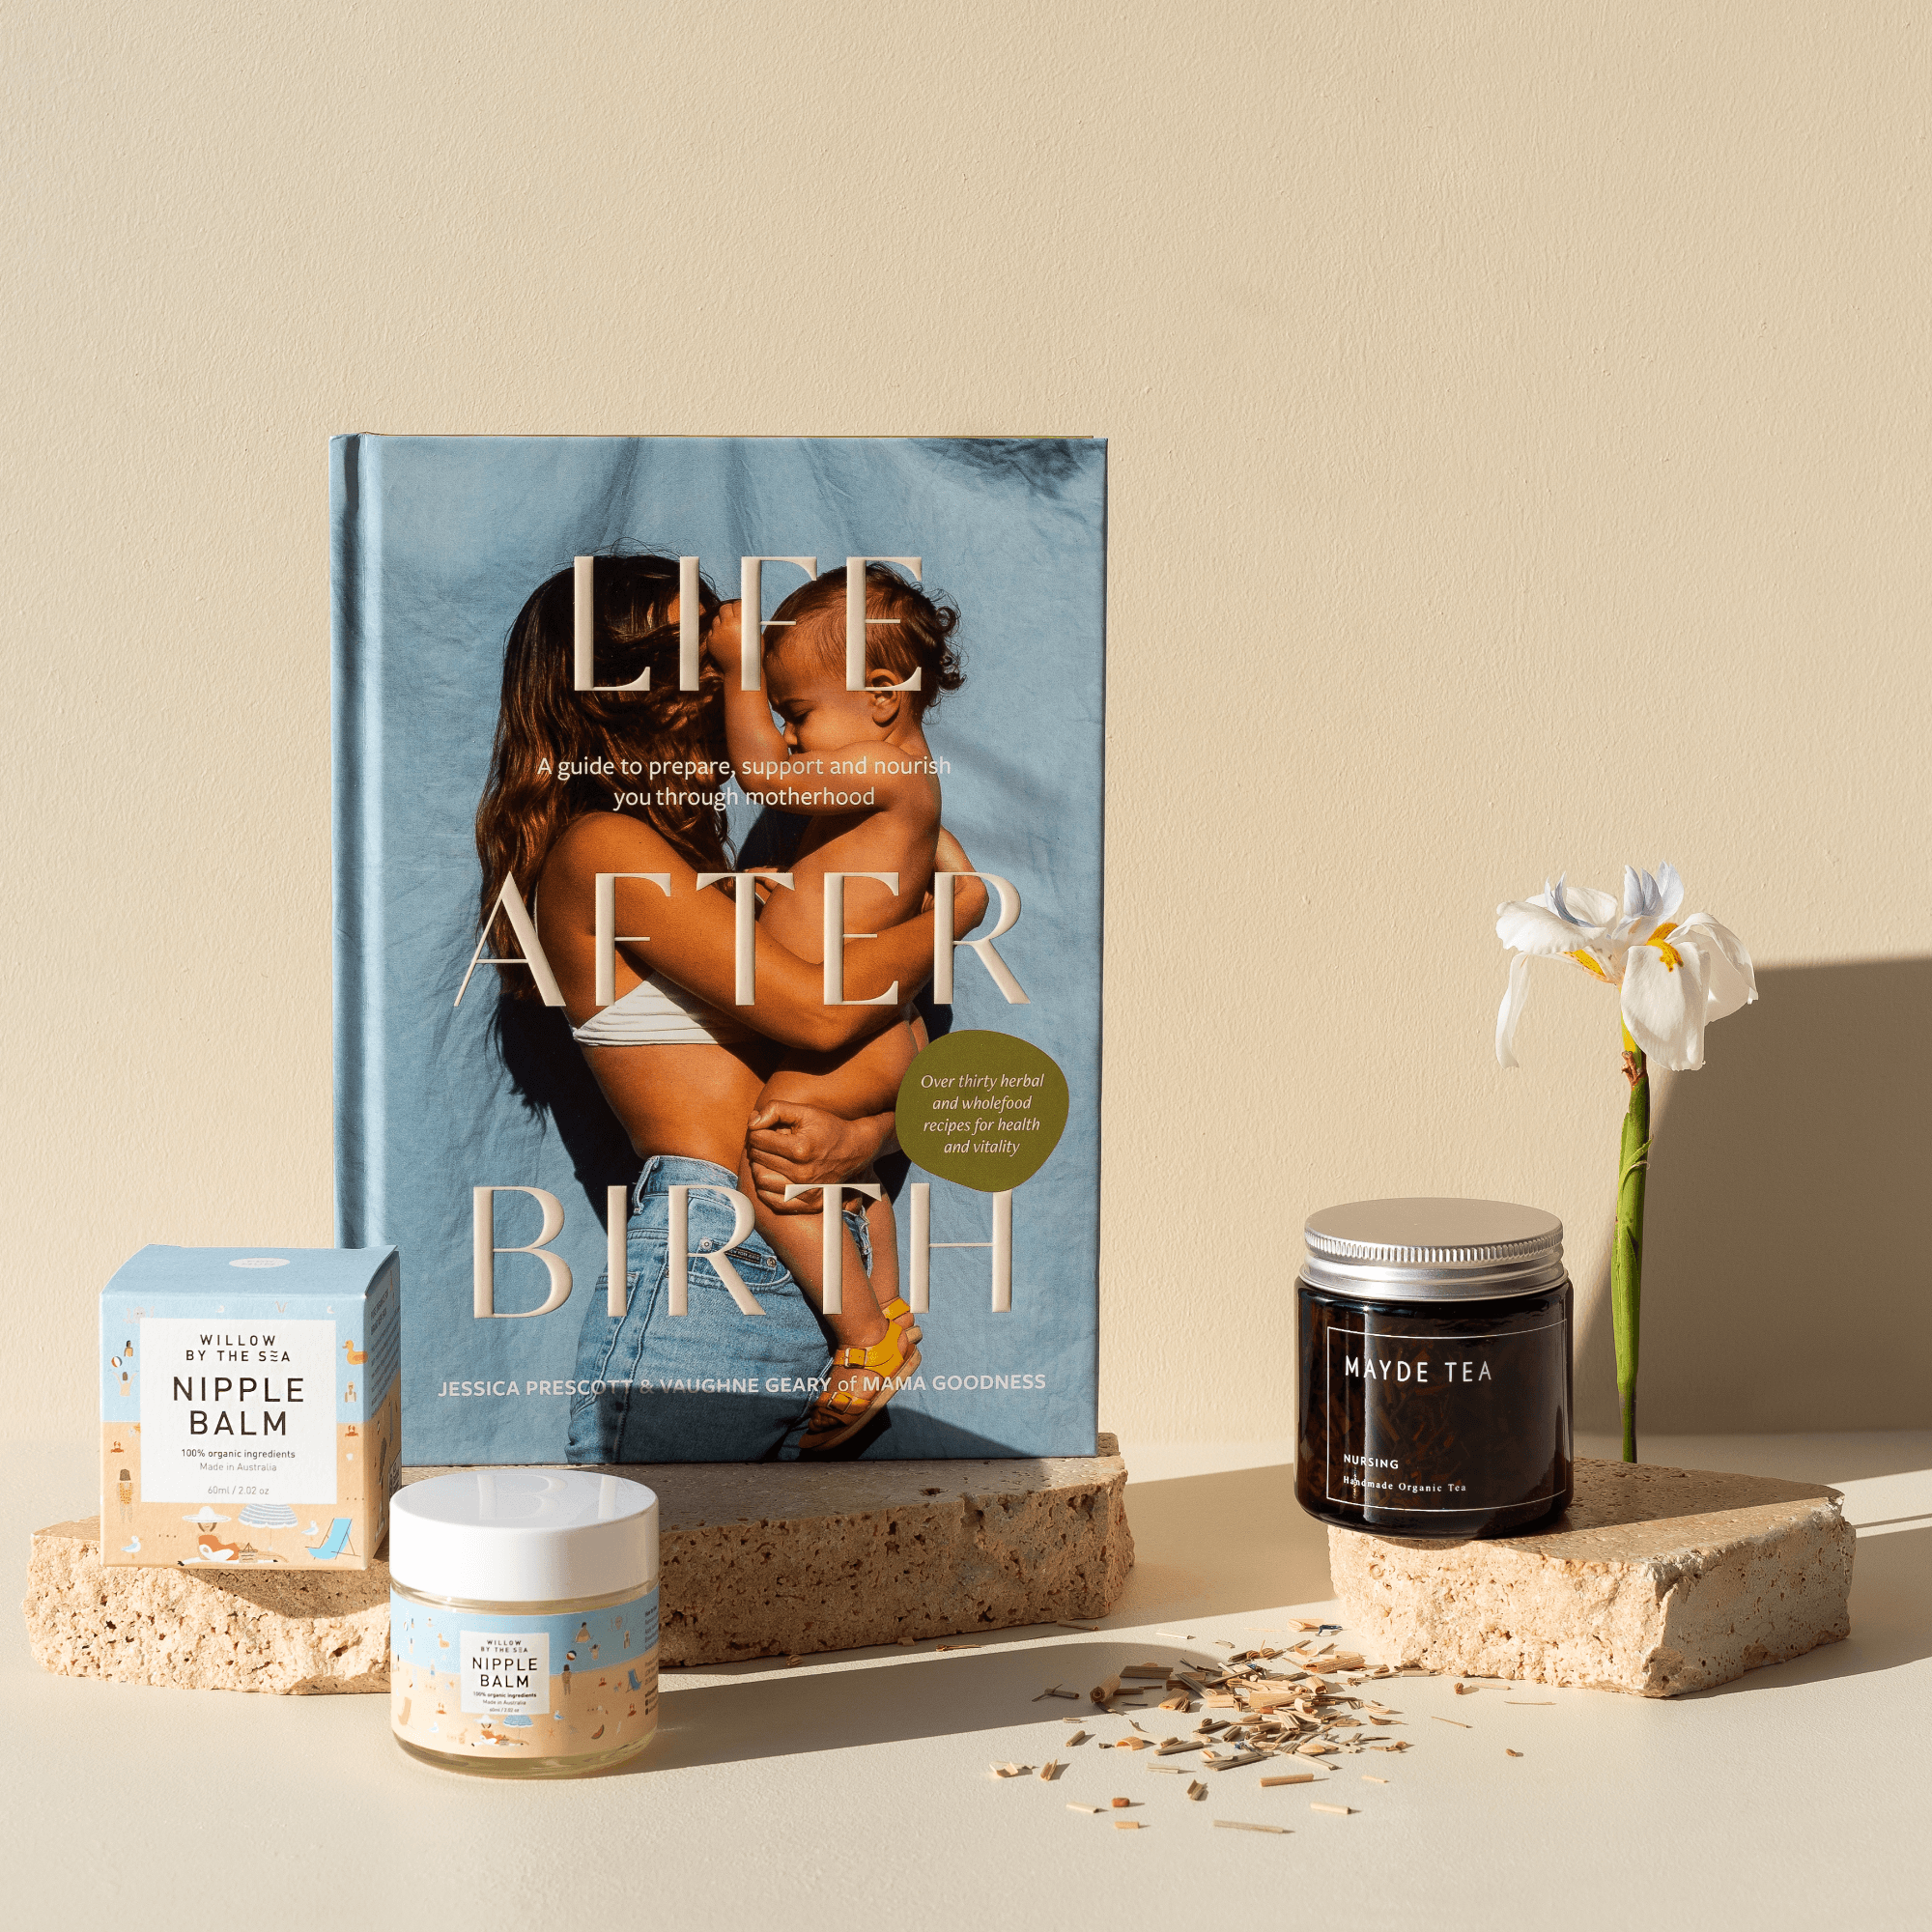 This is the hero image, featuring the regular bundle that includes, Life After Birth by Jessica Prescott, Mayde Tea and Willow by the Sea Nipple Balm